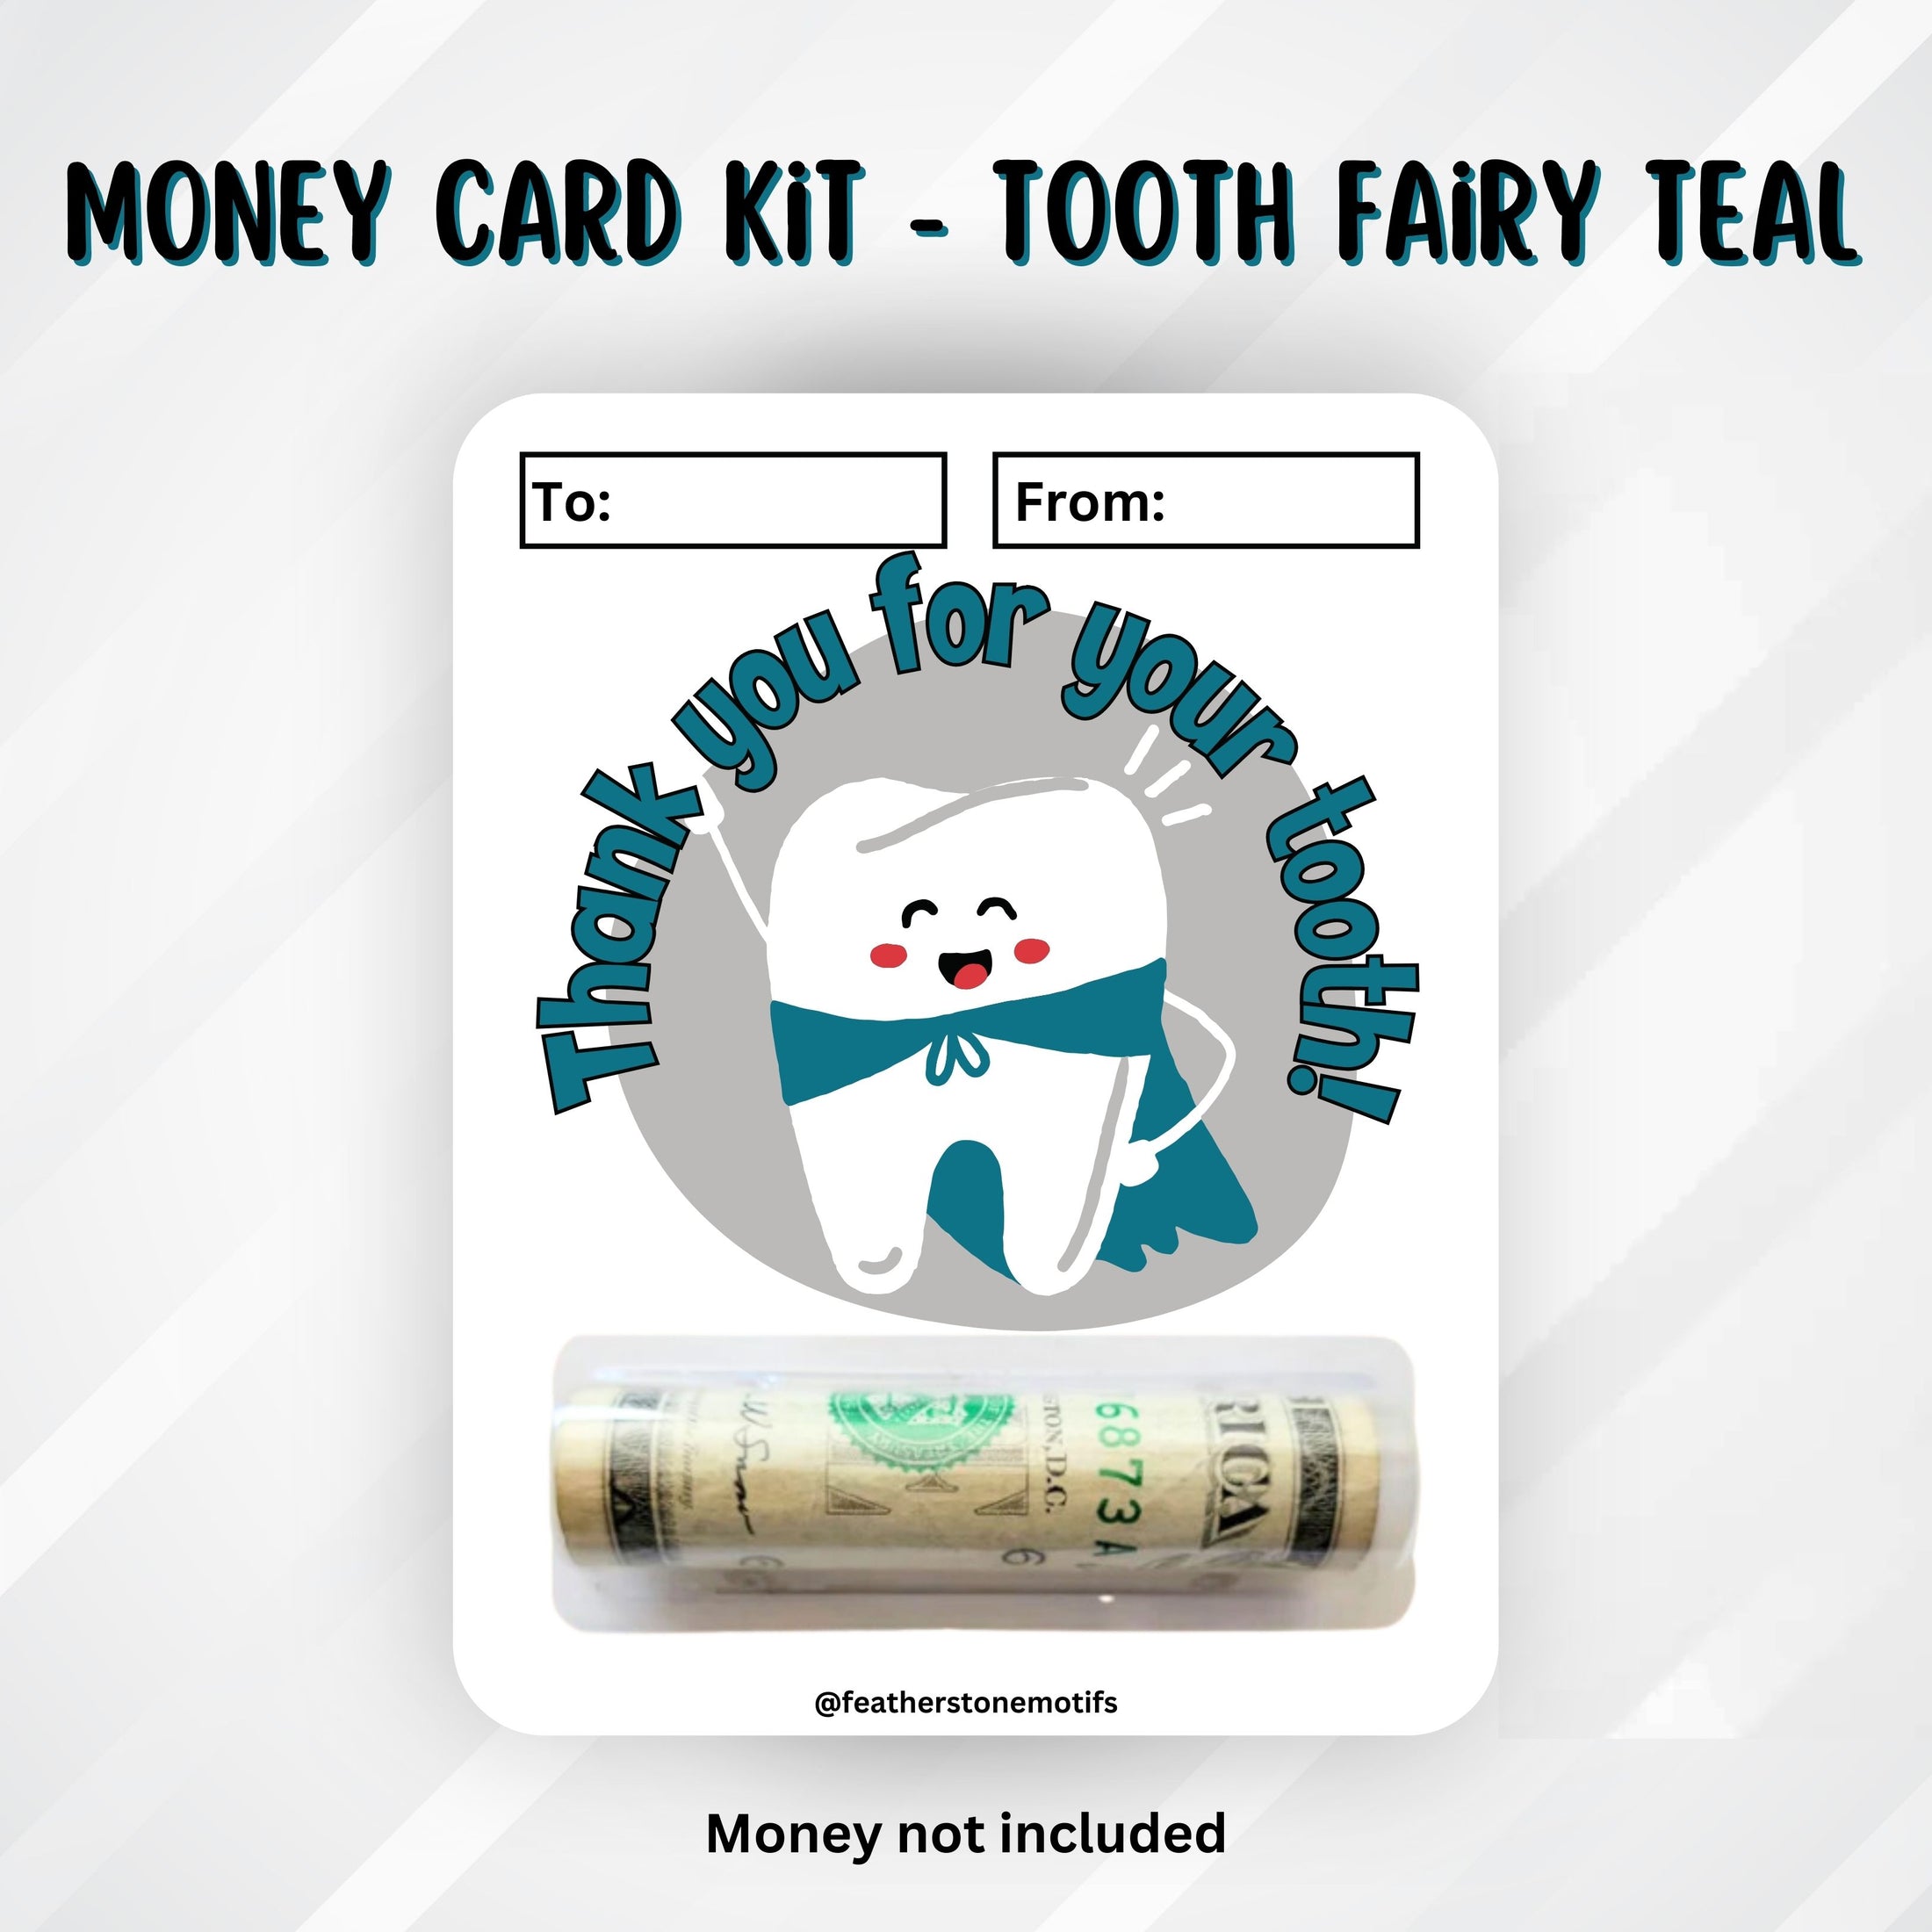 This image shows the money tube attached to the Tooth Fairy Teal Money Card.